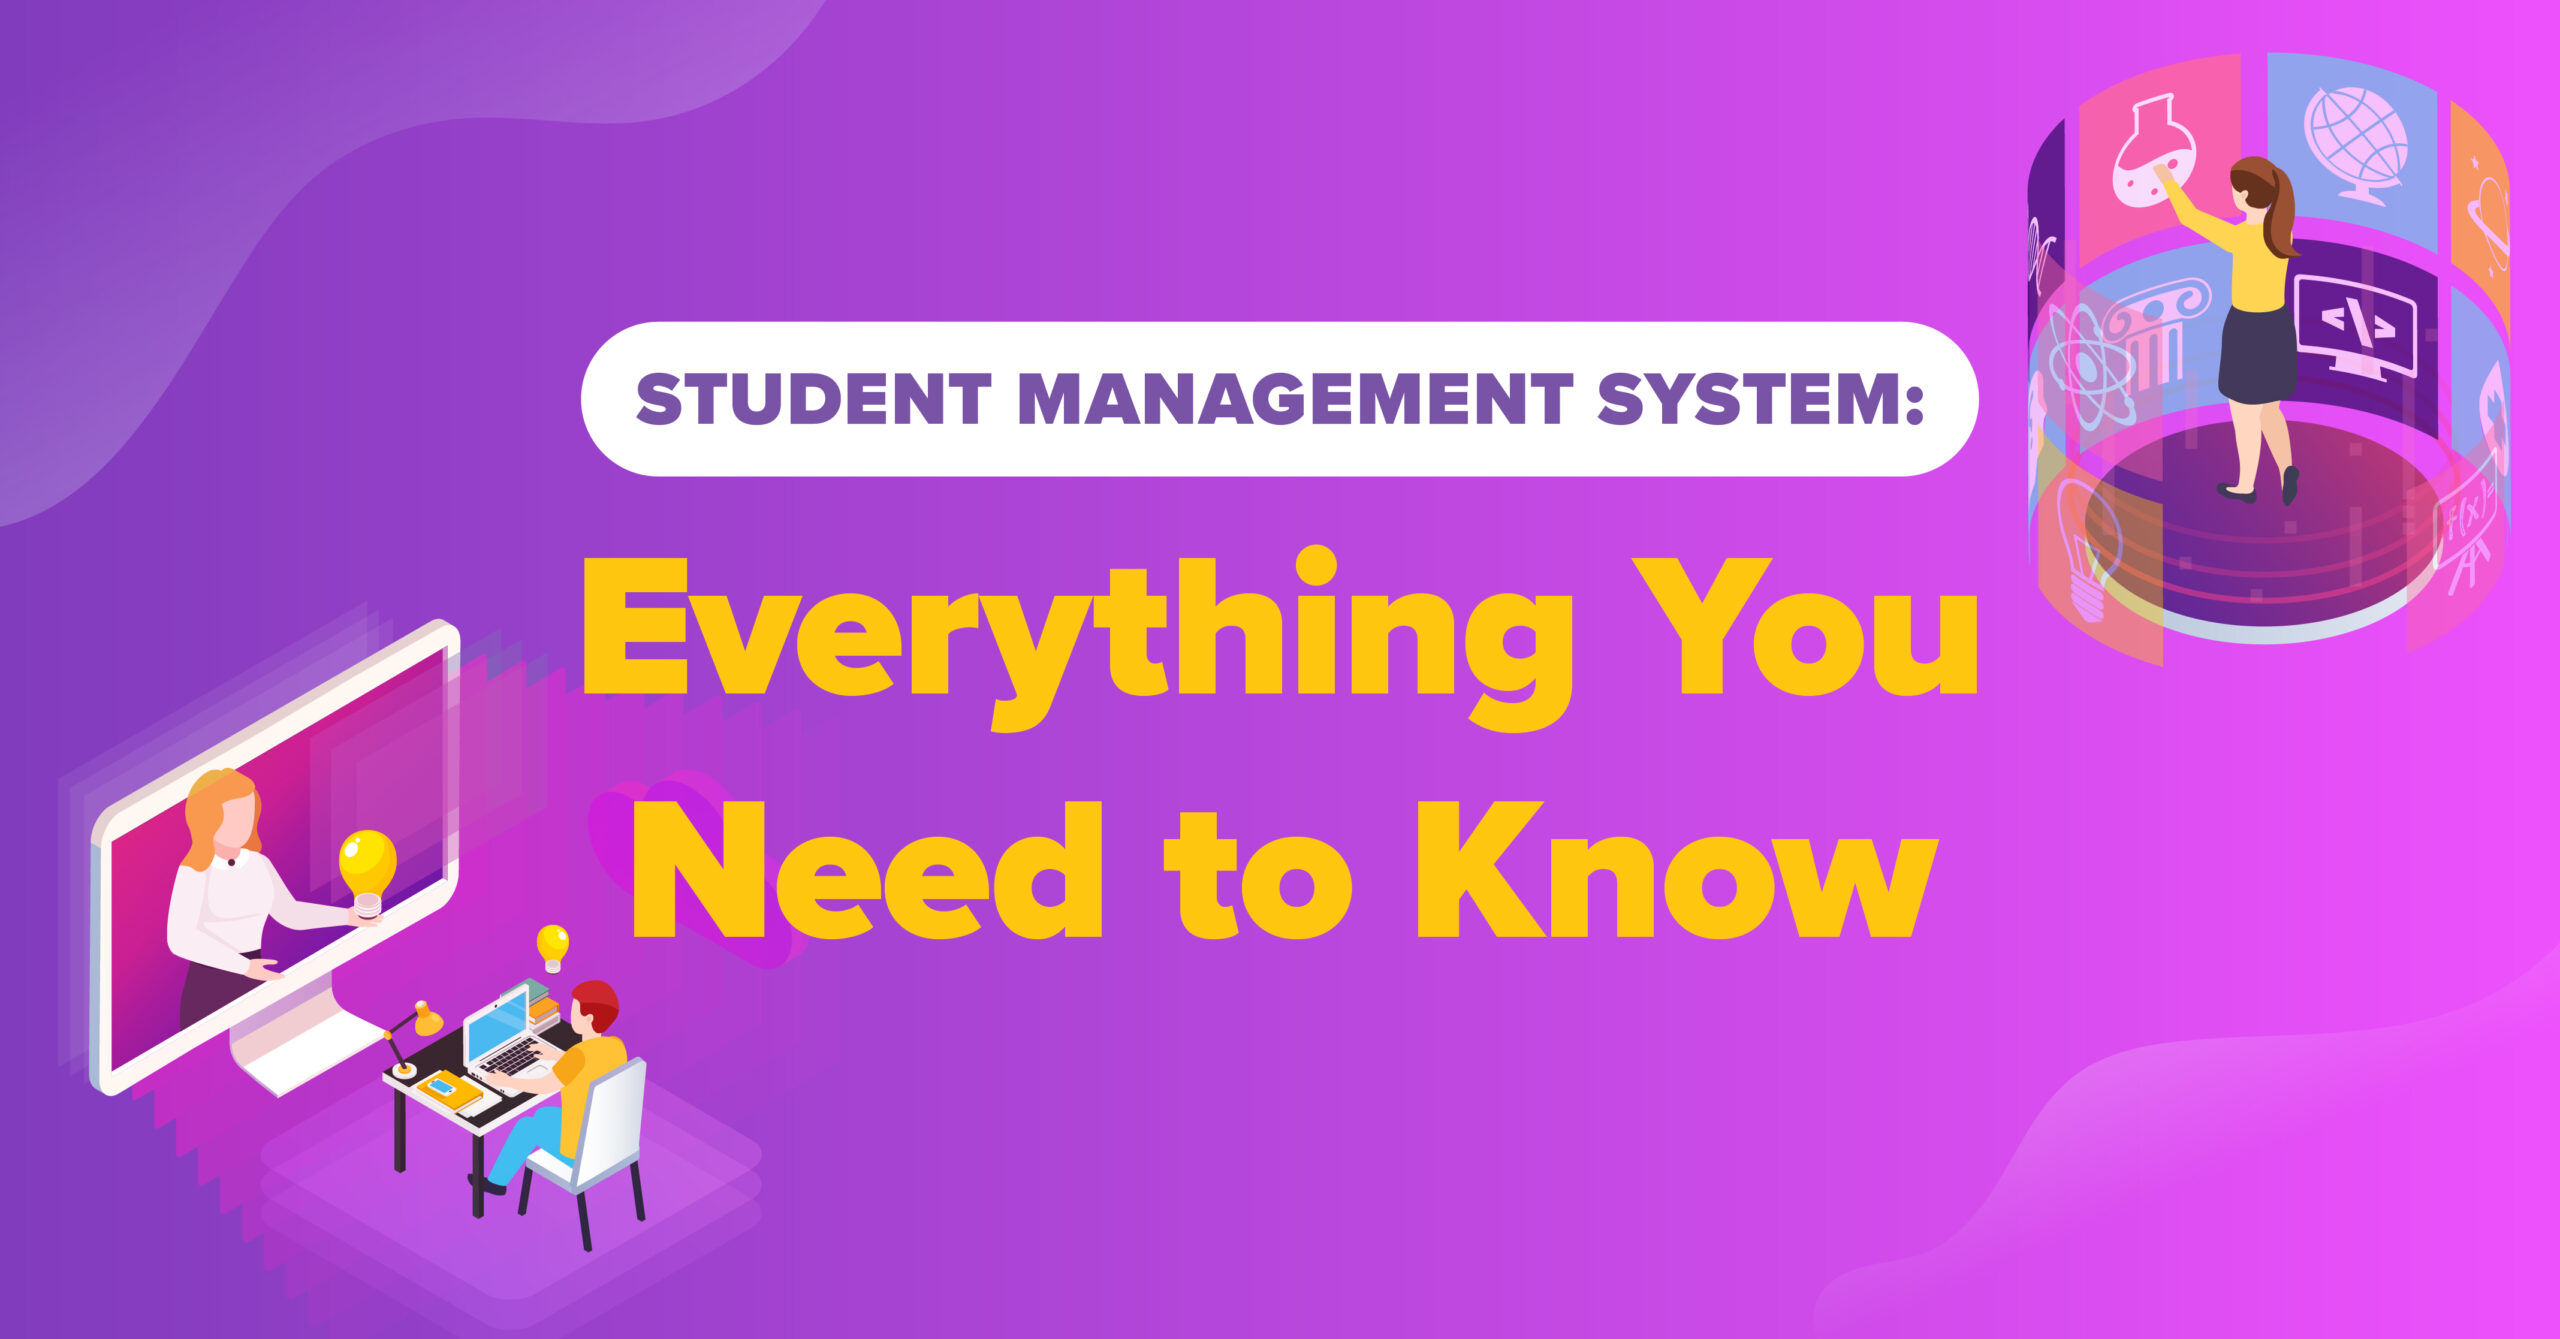 Student Management System: Everything You Need to Know